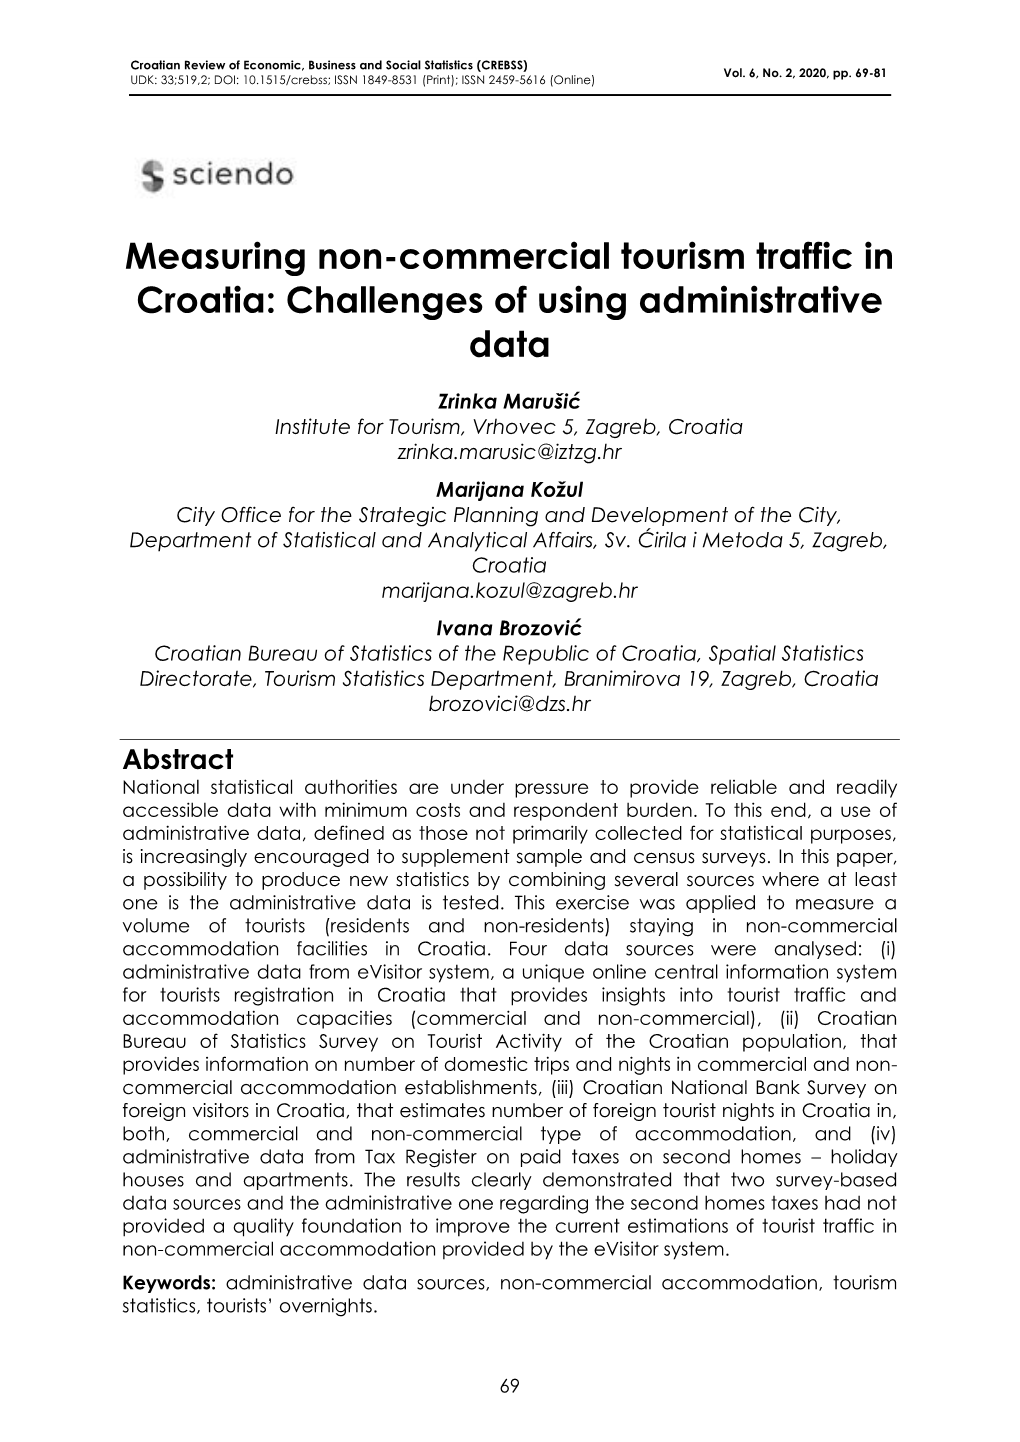 Measuring Non-Commercial Tourism Traffic in Croatia: Challenges of Using Administrative Data